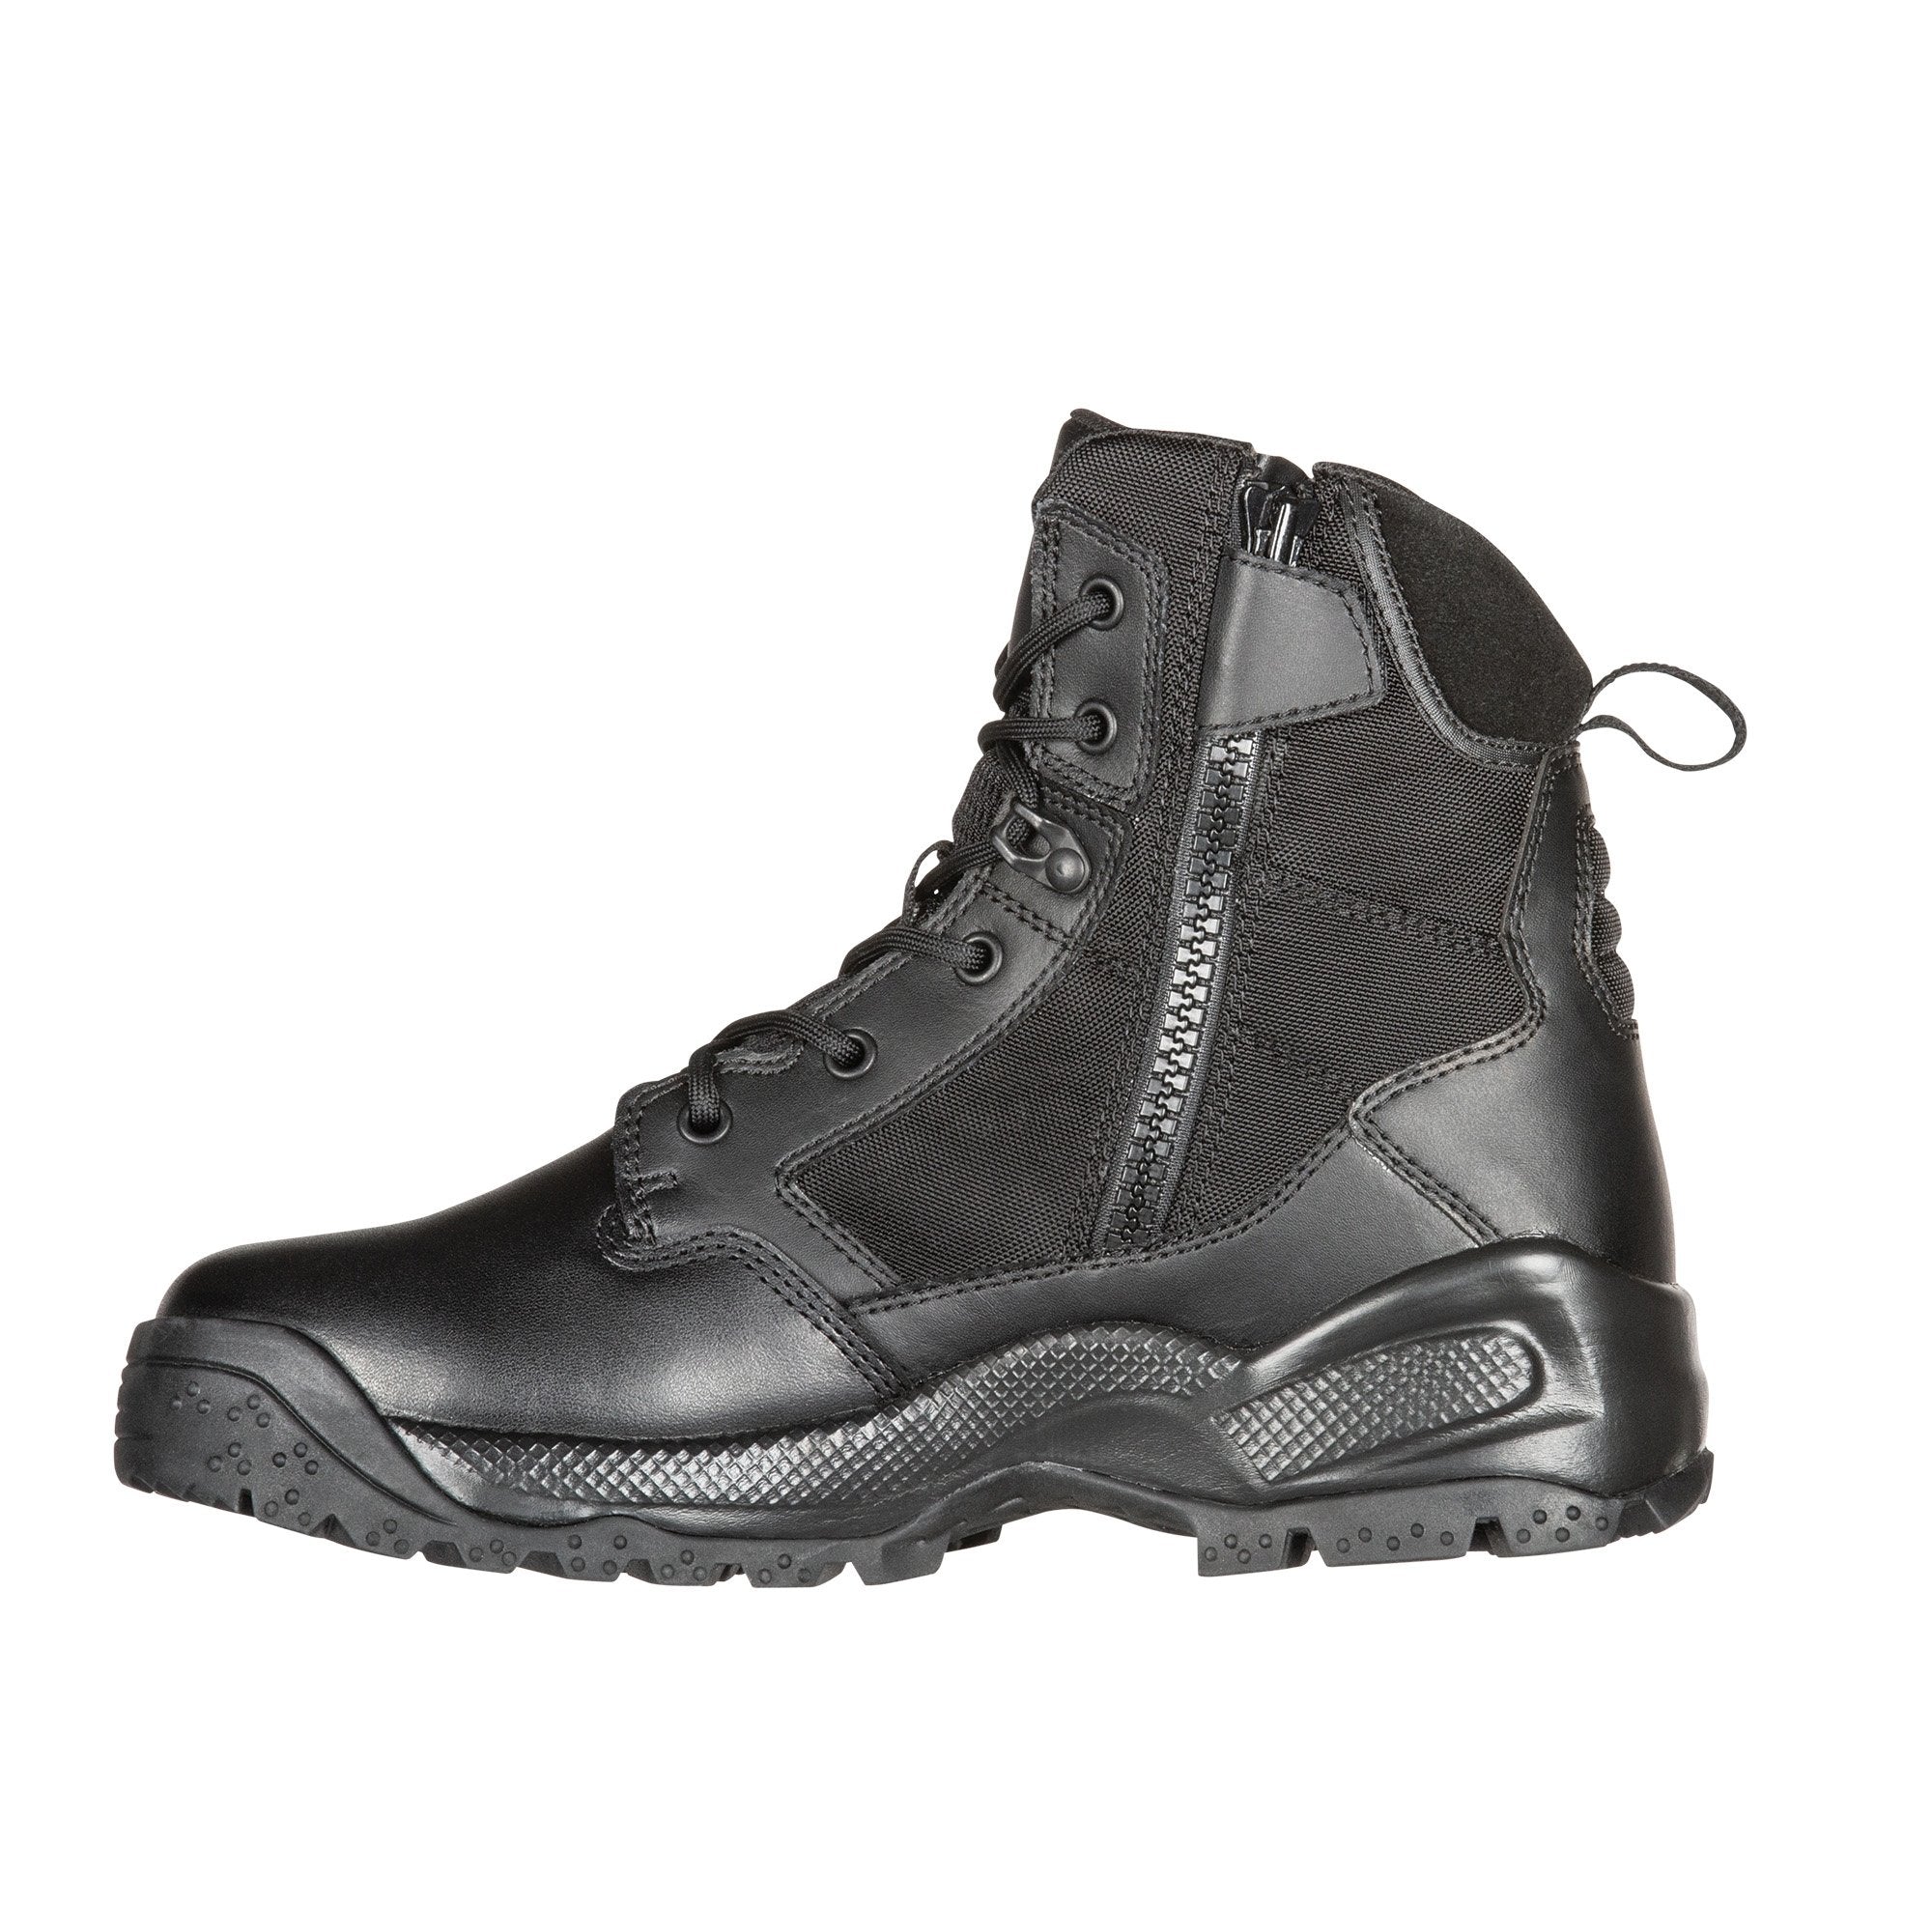 5.11 Tactical ATAC 2.0 6 Inches Side Zip Boot Black Footwear 5.11 Tactical Tactical Gear Supplier Tactical Distributors Australia